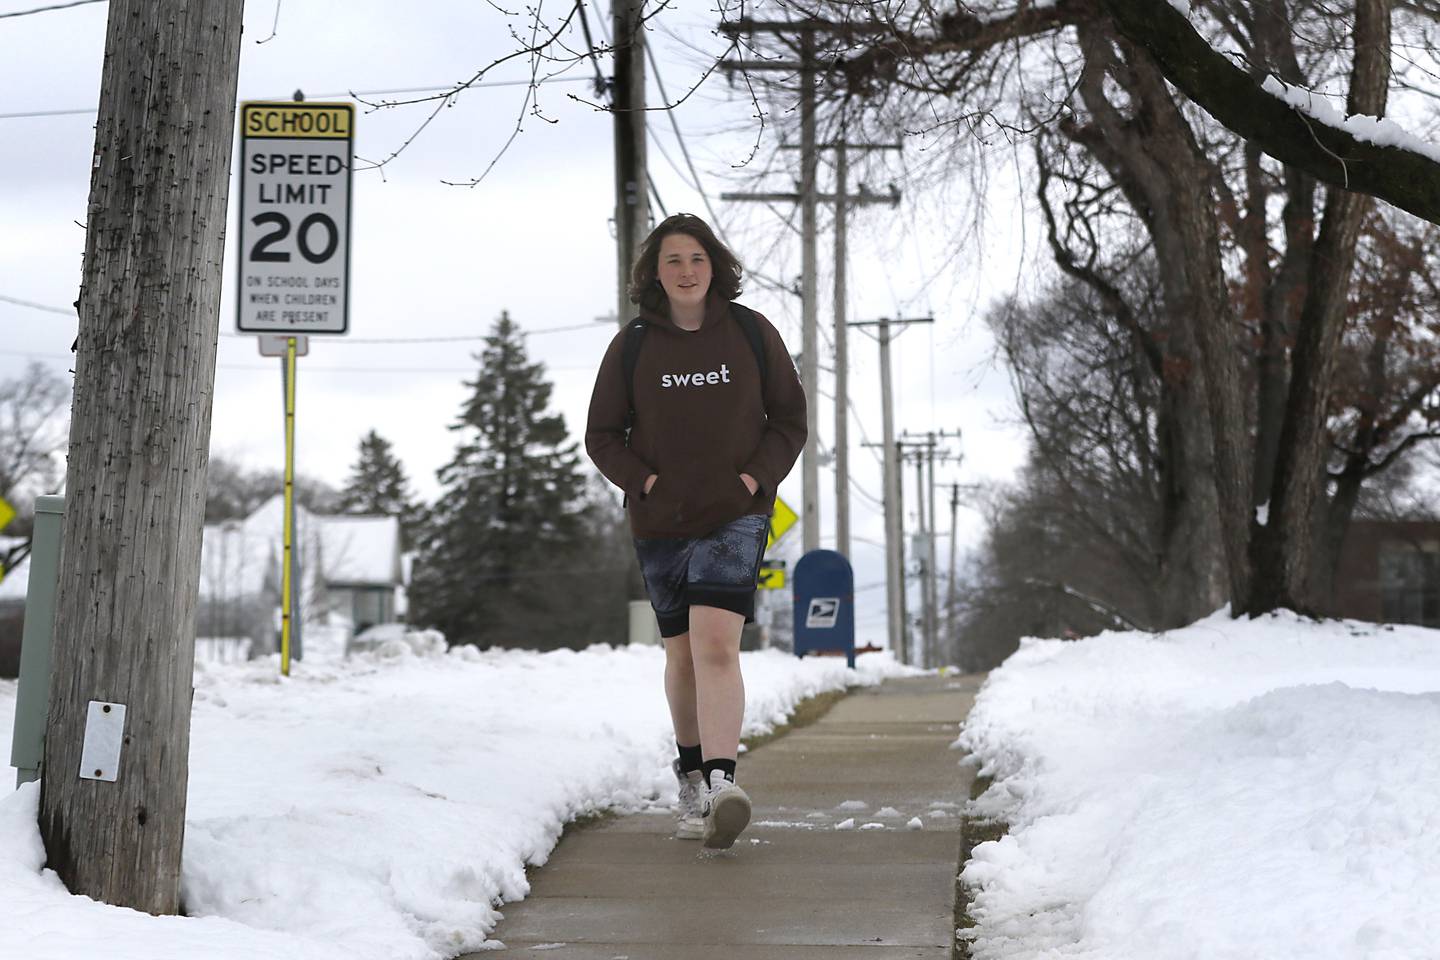 Lucas Iversen, a junior at Woodstock High School, walks home from school alongSouth Street in Woodstock Friday, March 10, 2023.  Woodstock had one of the highest snow totals from the winter storm that rolled through Thursday afternoon into Friday morning, according to the National Weather Service in Romeoville.
Snow totals throughout northern Illinois ranged from a half-inch reported in Batavia to 9.6 inches in Bull Valley, NWS Meteorologist Zachary Yack said.